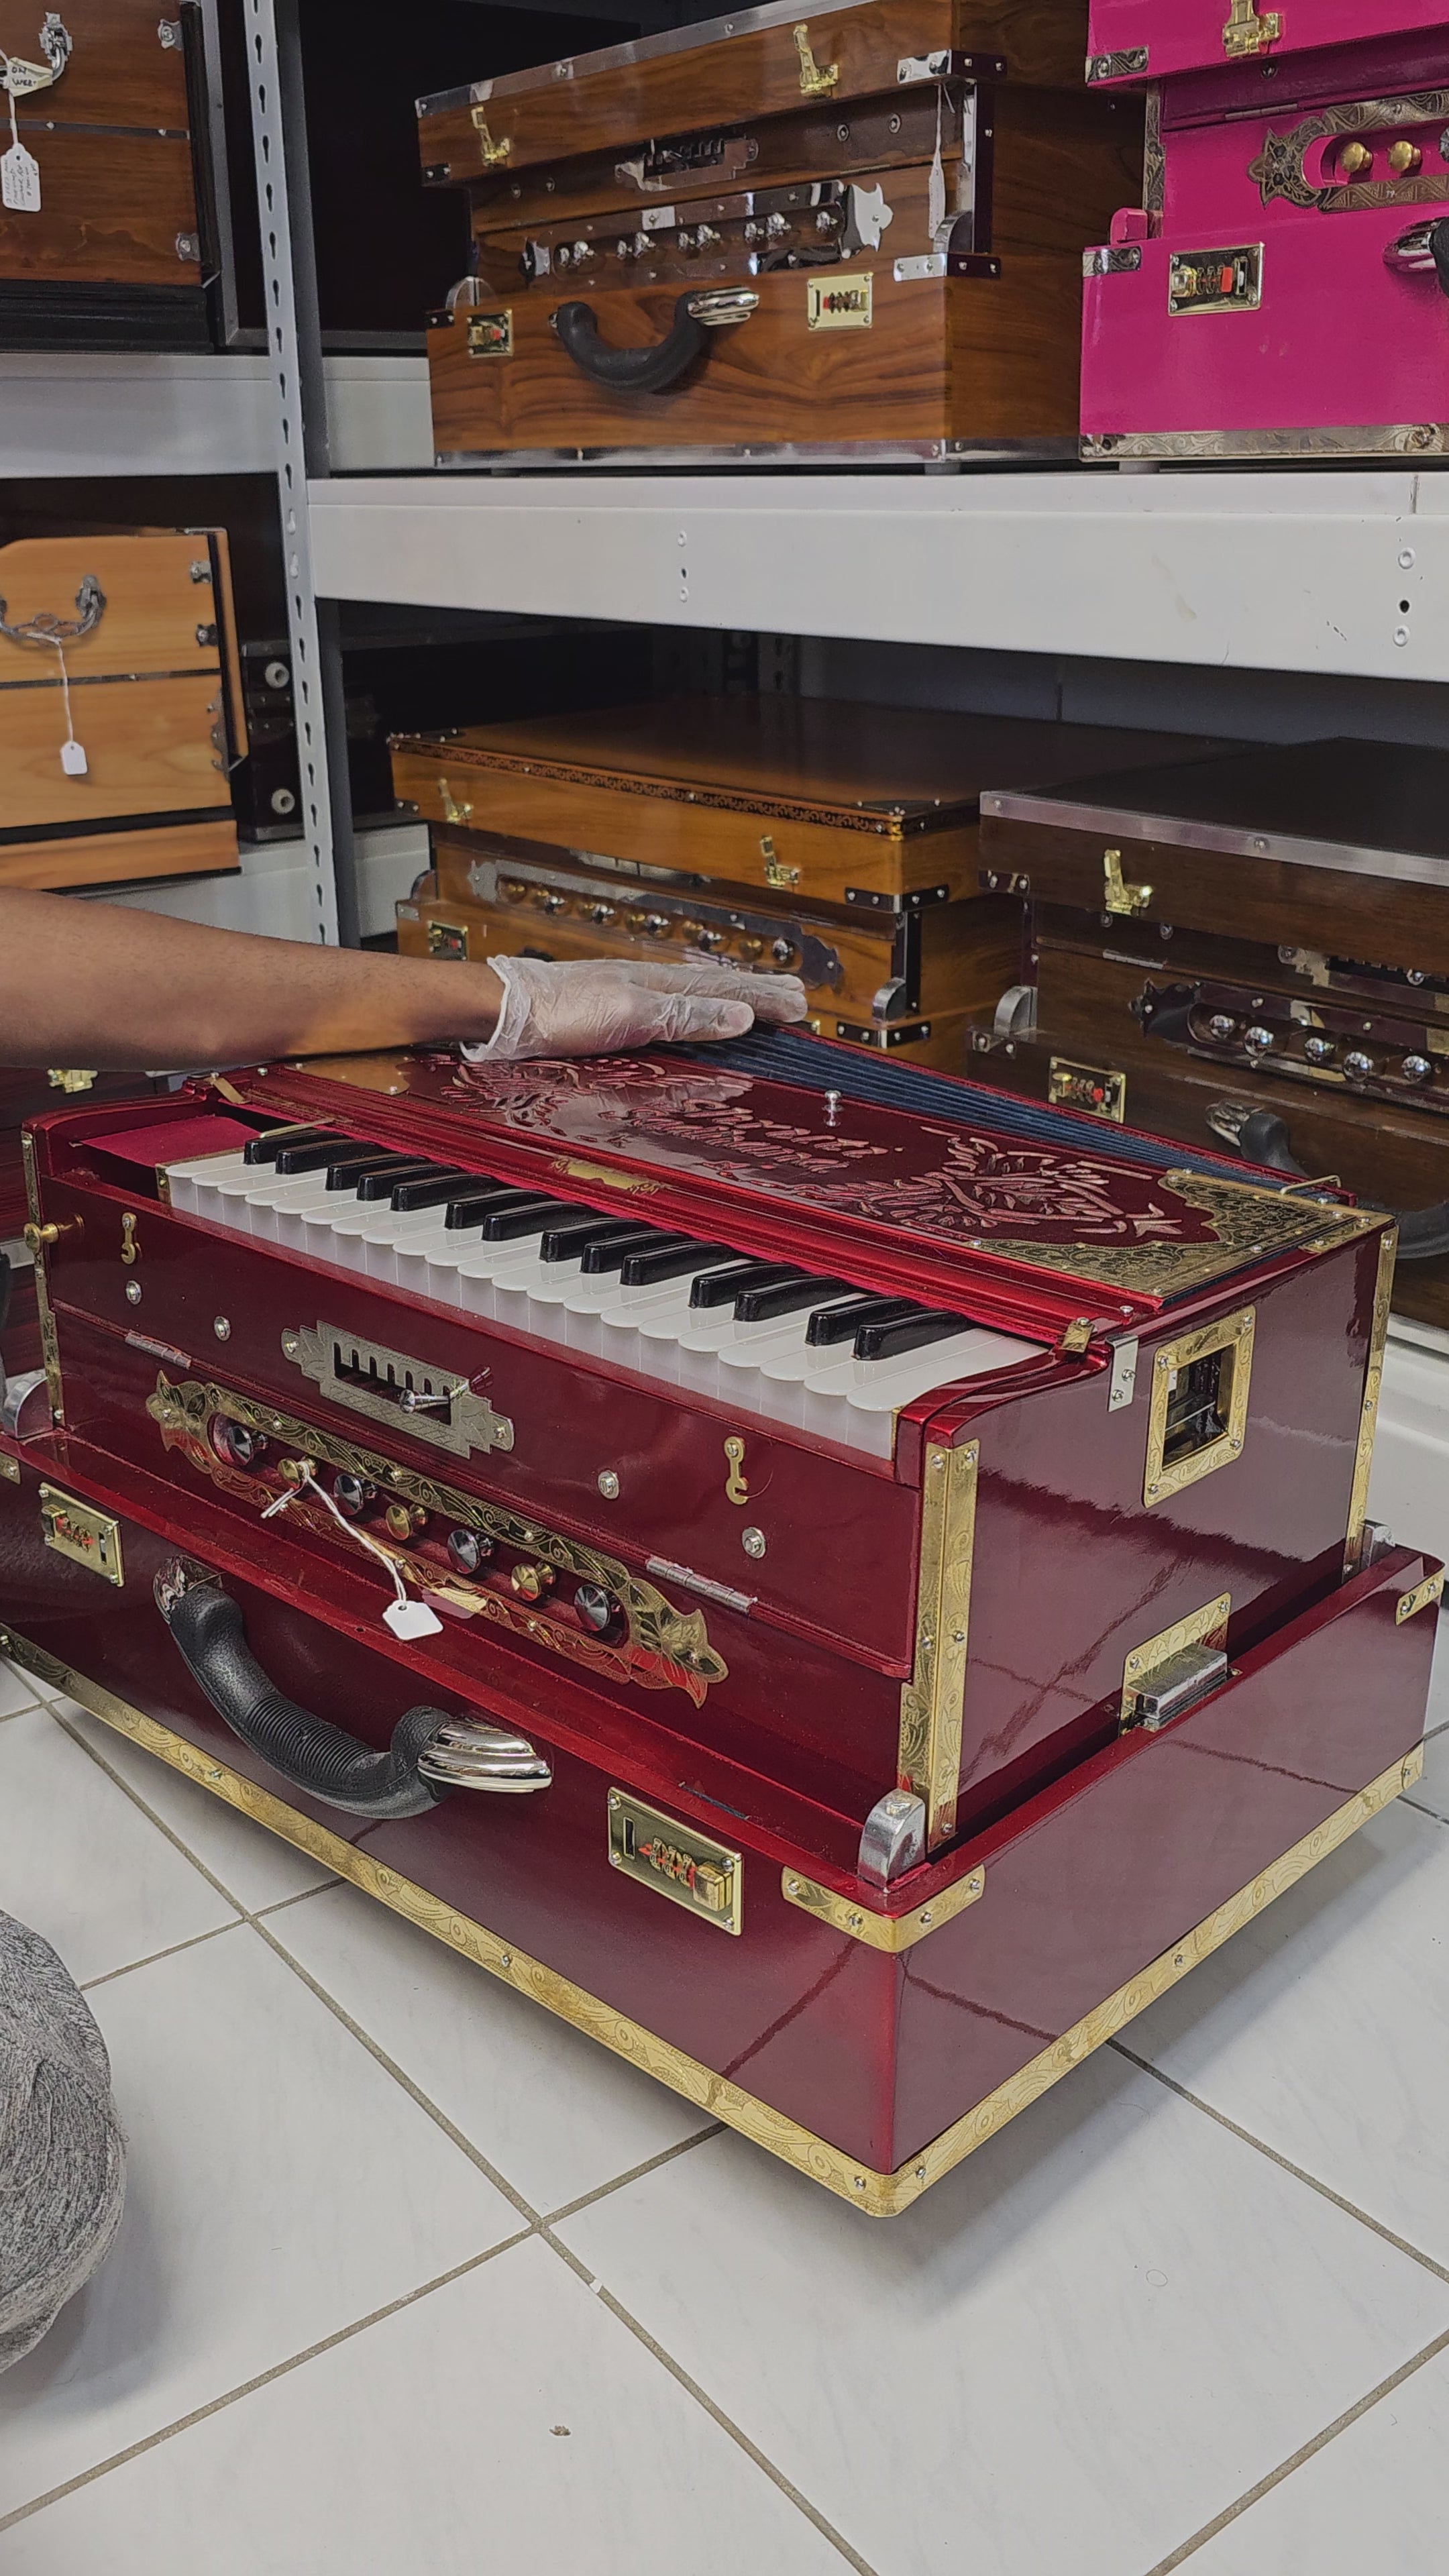 Scarlet Serenade 7- A Portable and Compact Glossy Red Scale-Changer Shruti Sadhana Harmonium with Golden Accents!